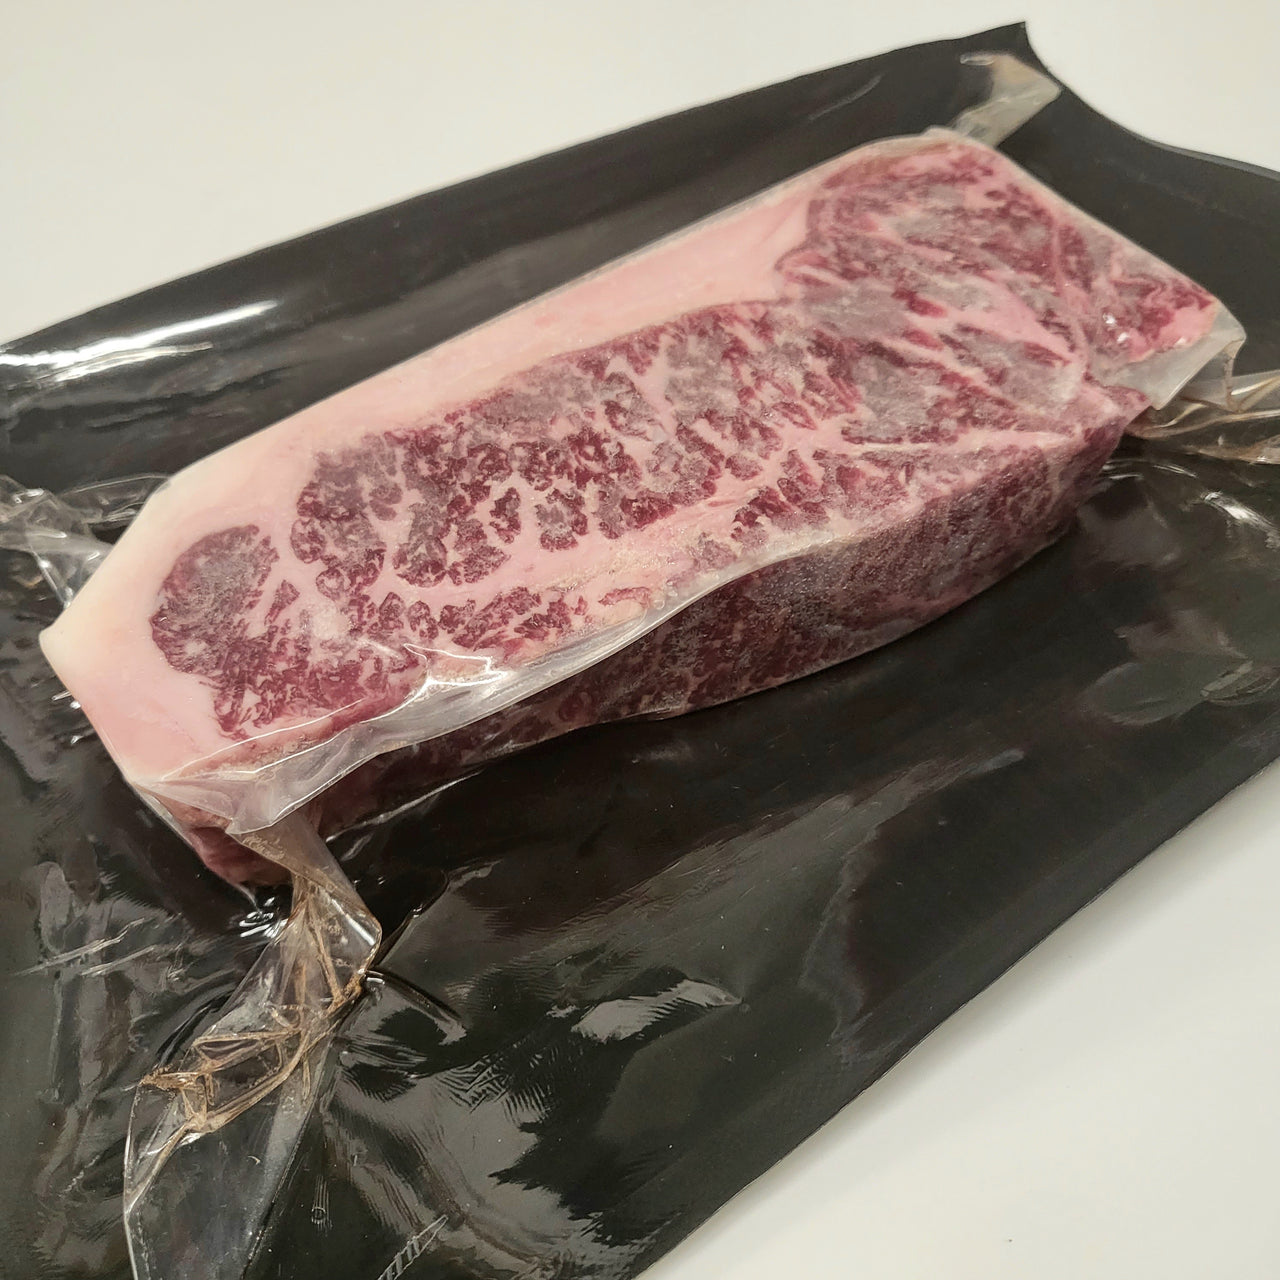 Grass Fed Grass Finished Beef NY Strip Steak Bone OUT Japanese Black Wagyu NOT AGED